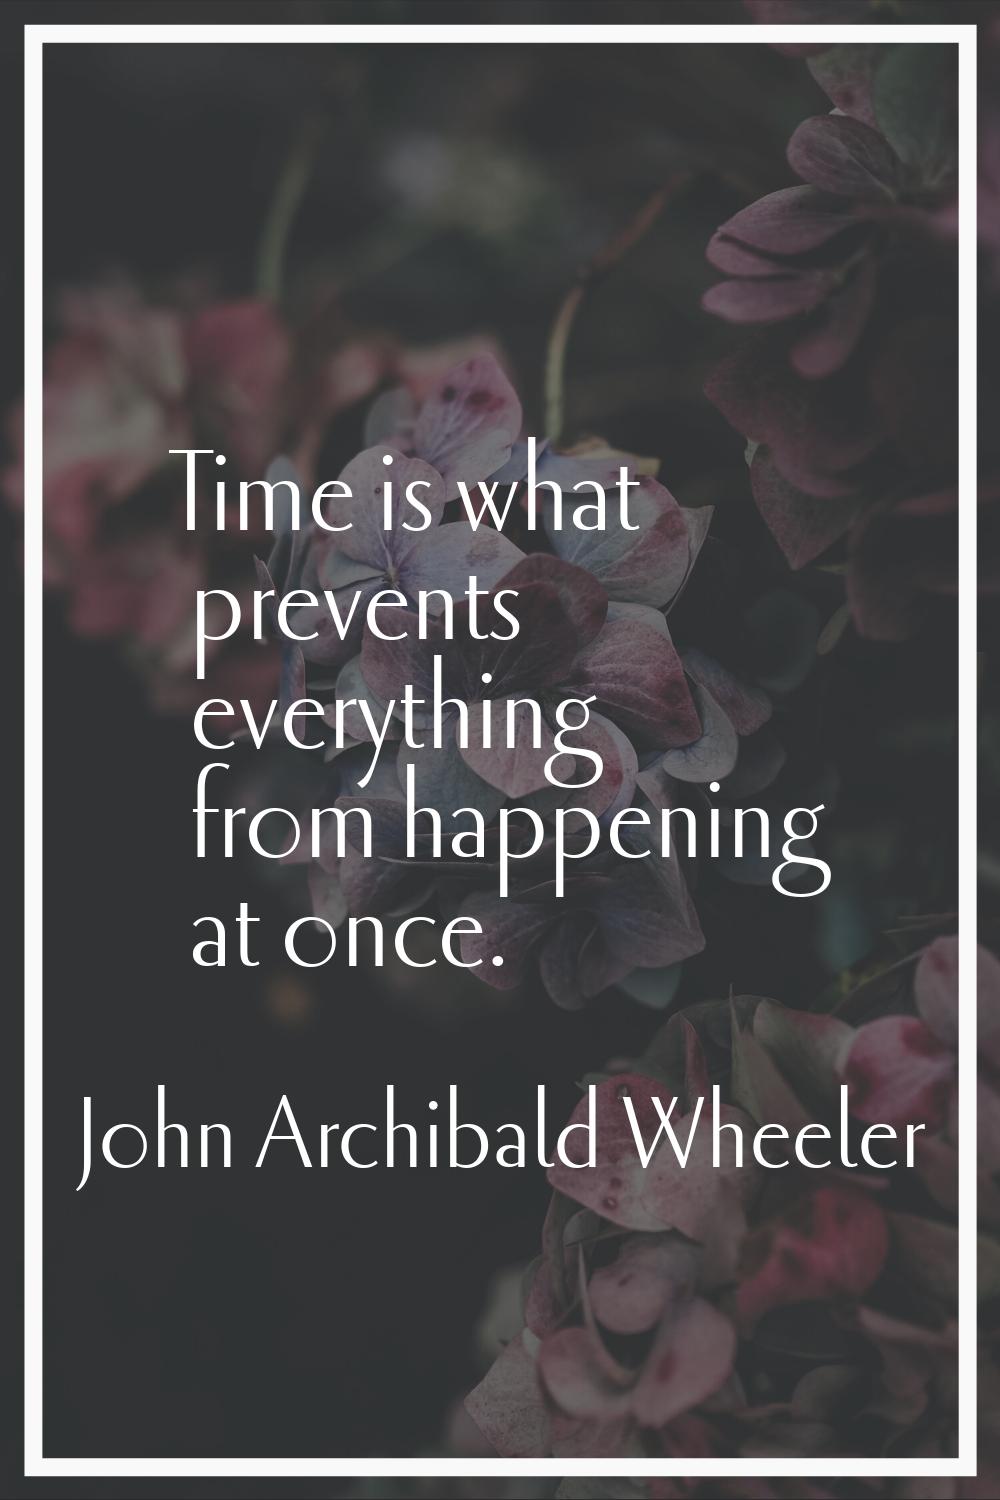 Time is what prevents everything from happening at once.